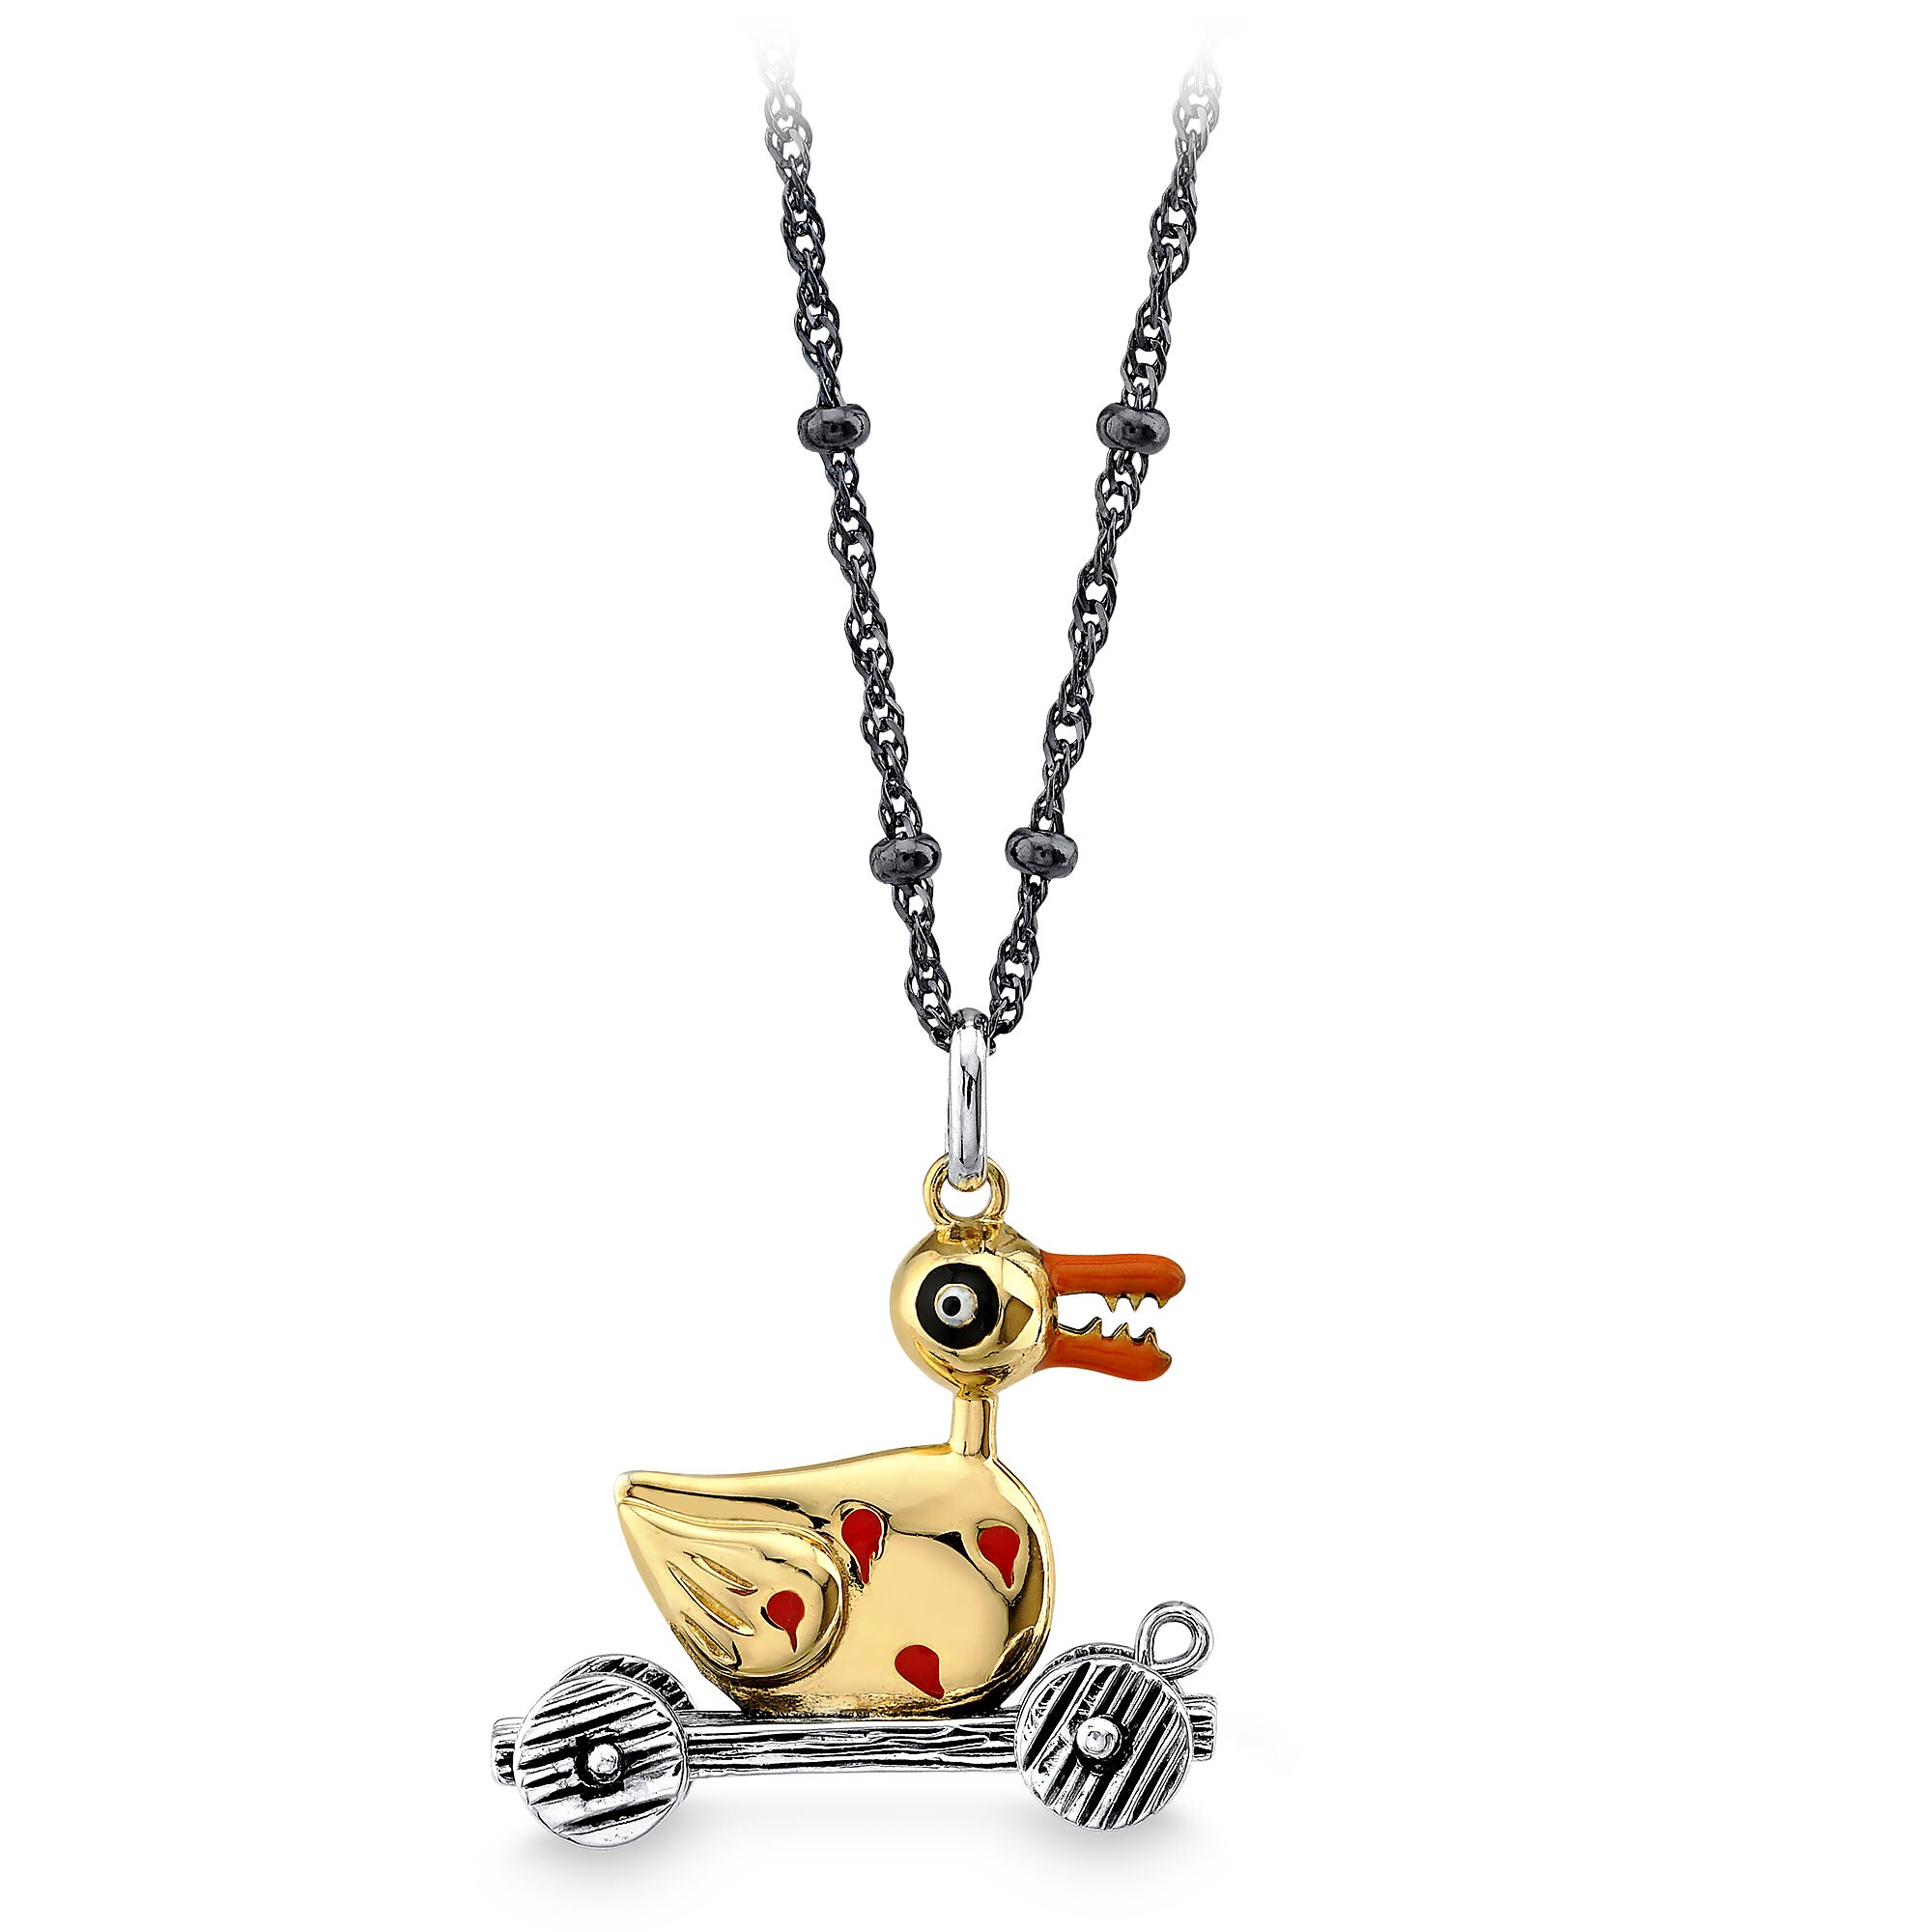 Zombie Duck Necklace by RockLove - The Nightmare Before Christmas